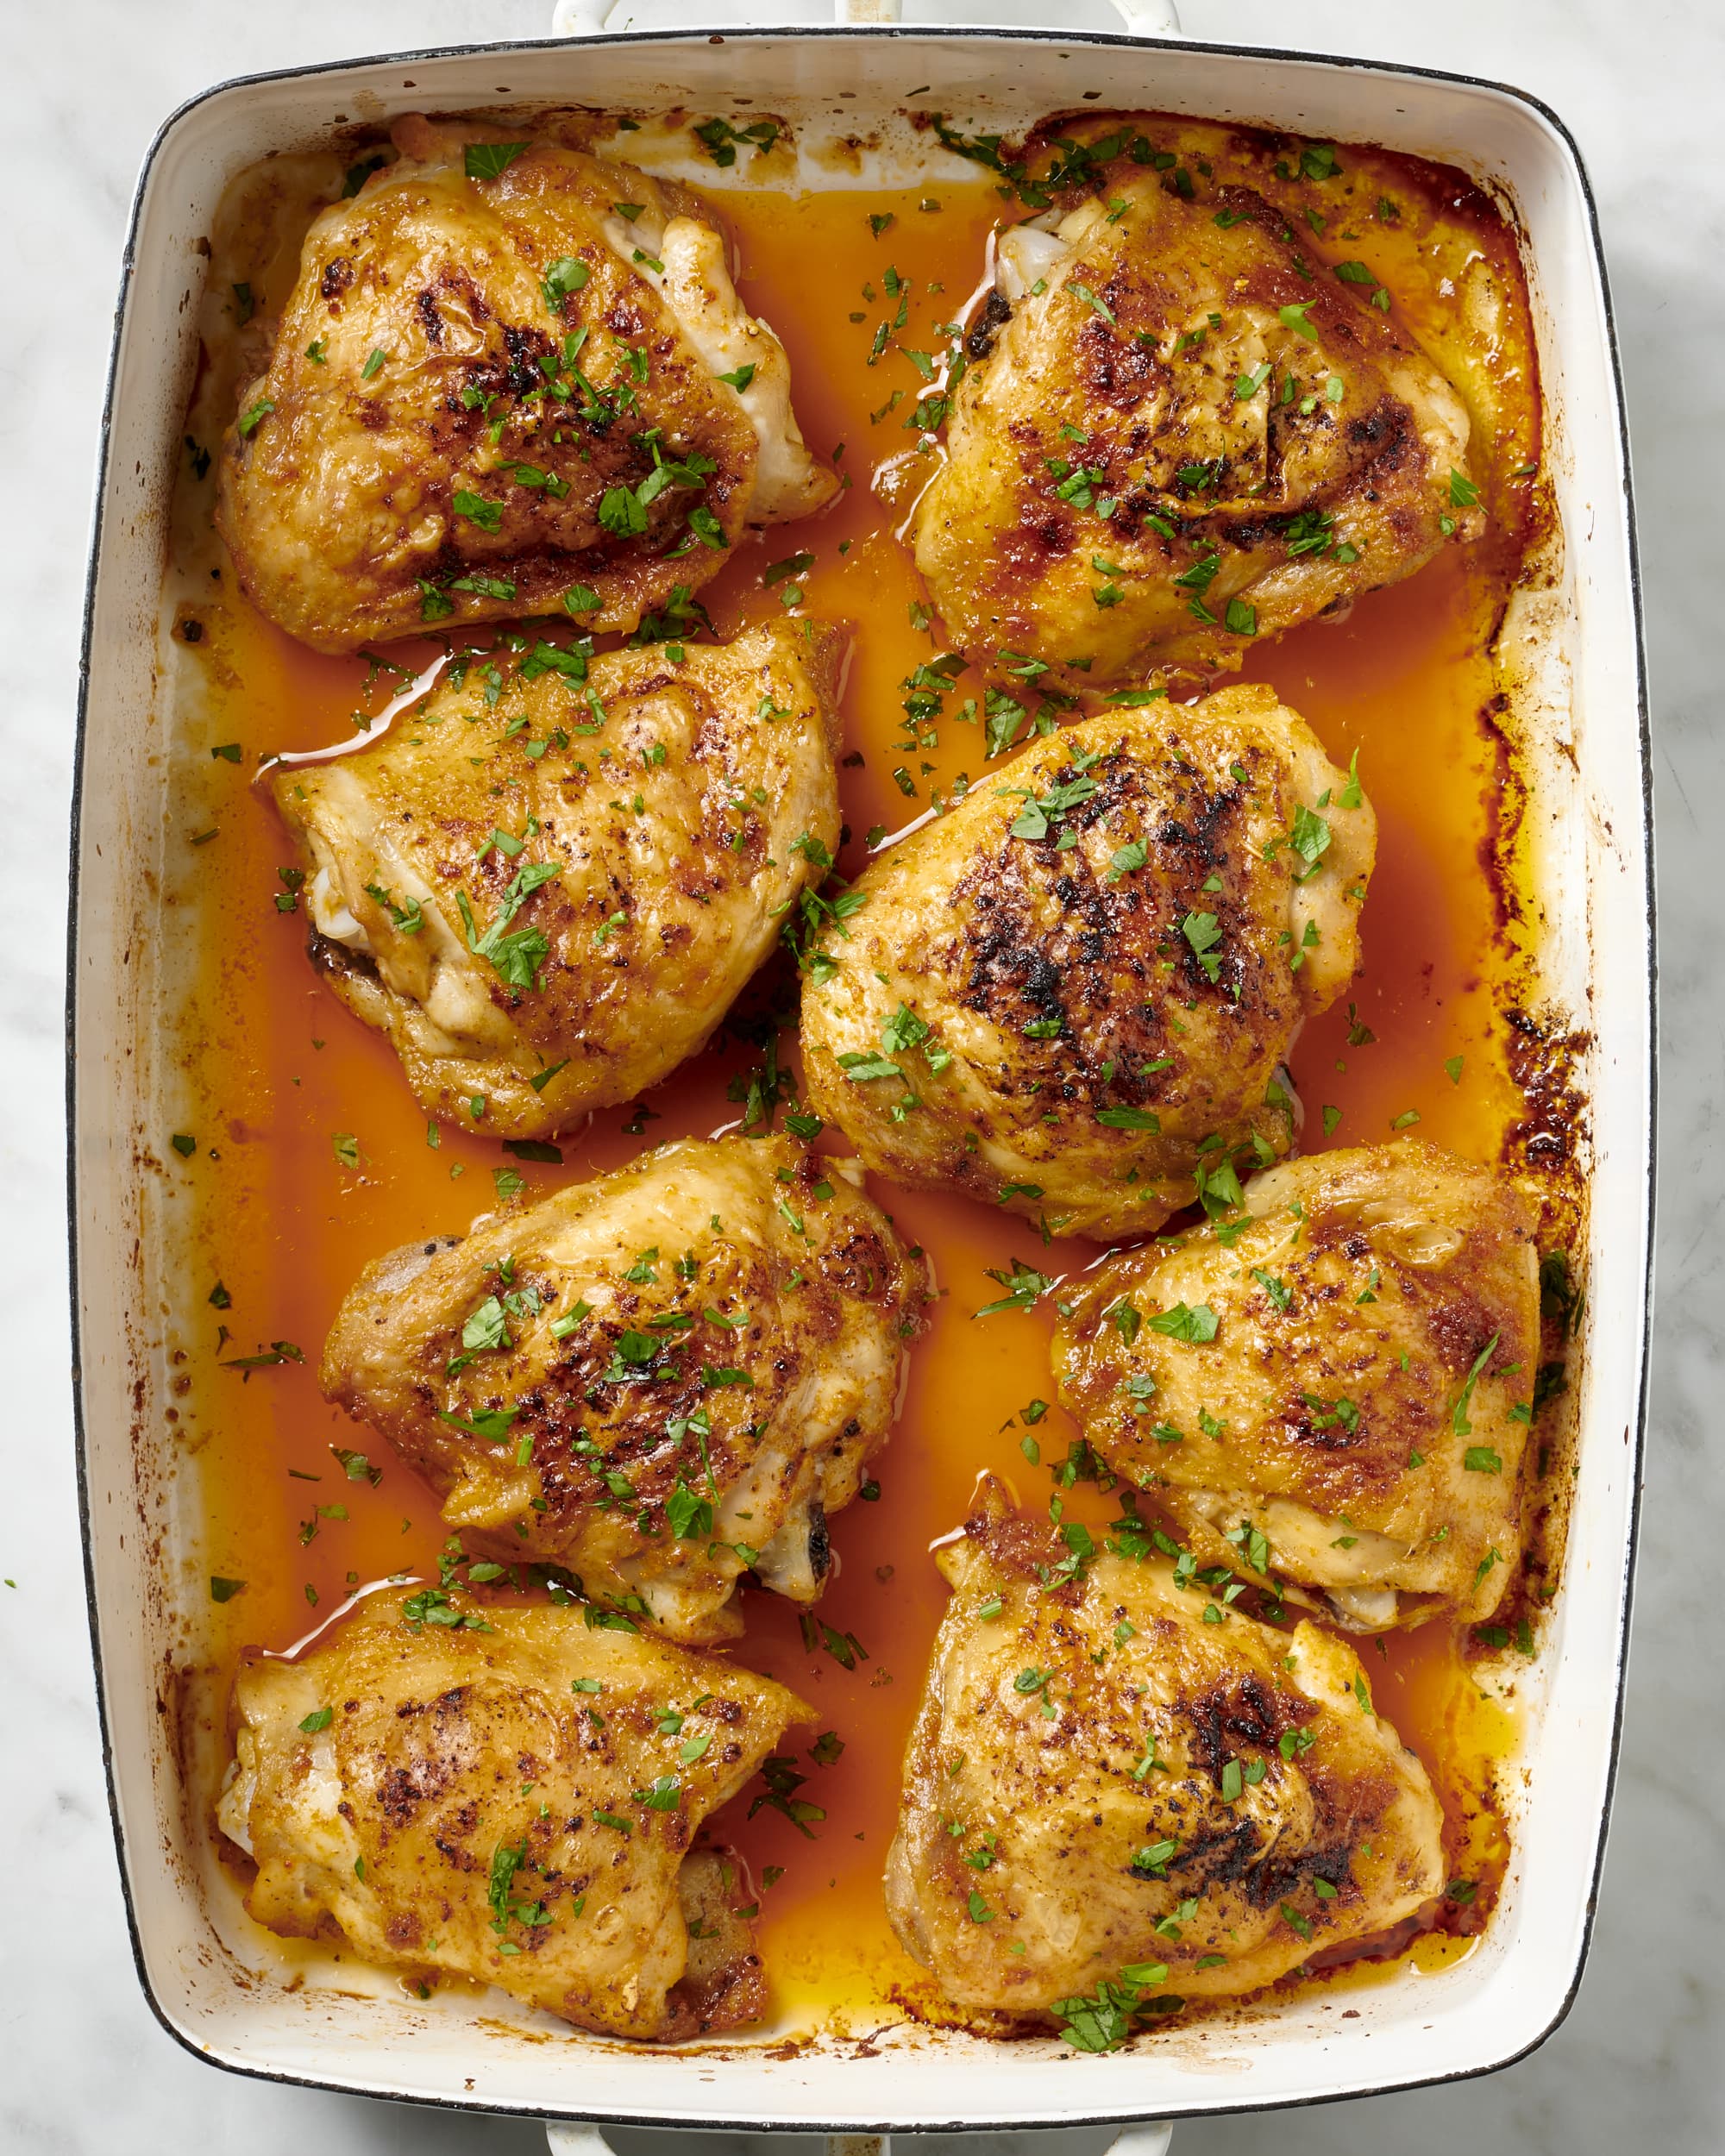 https://cdn.apartmenttherapy.info/image/upload/v1694094940/k/Photo/Series/2023-09-how-to-cook-chicken-thighs/how-to-cook-chicken-thighs-844.jpg